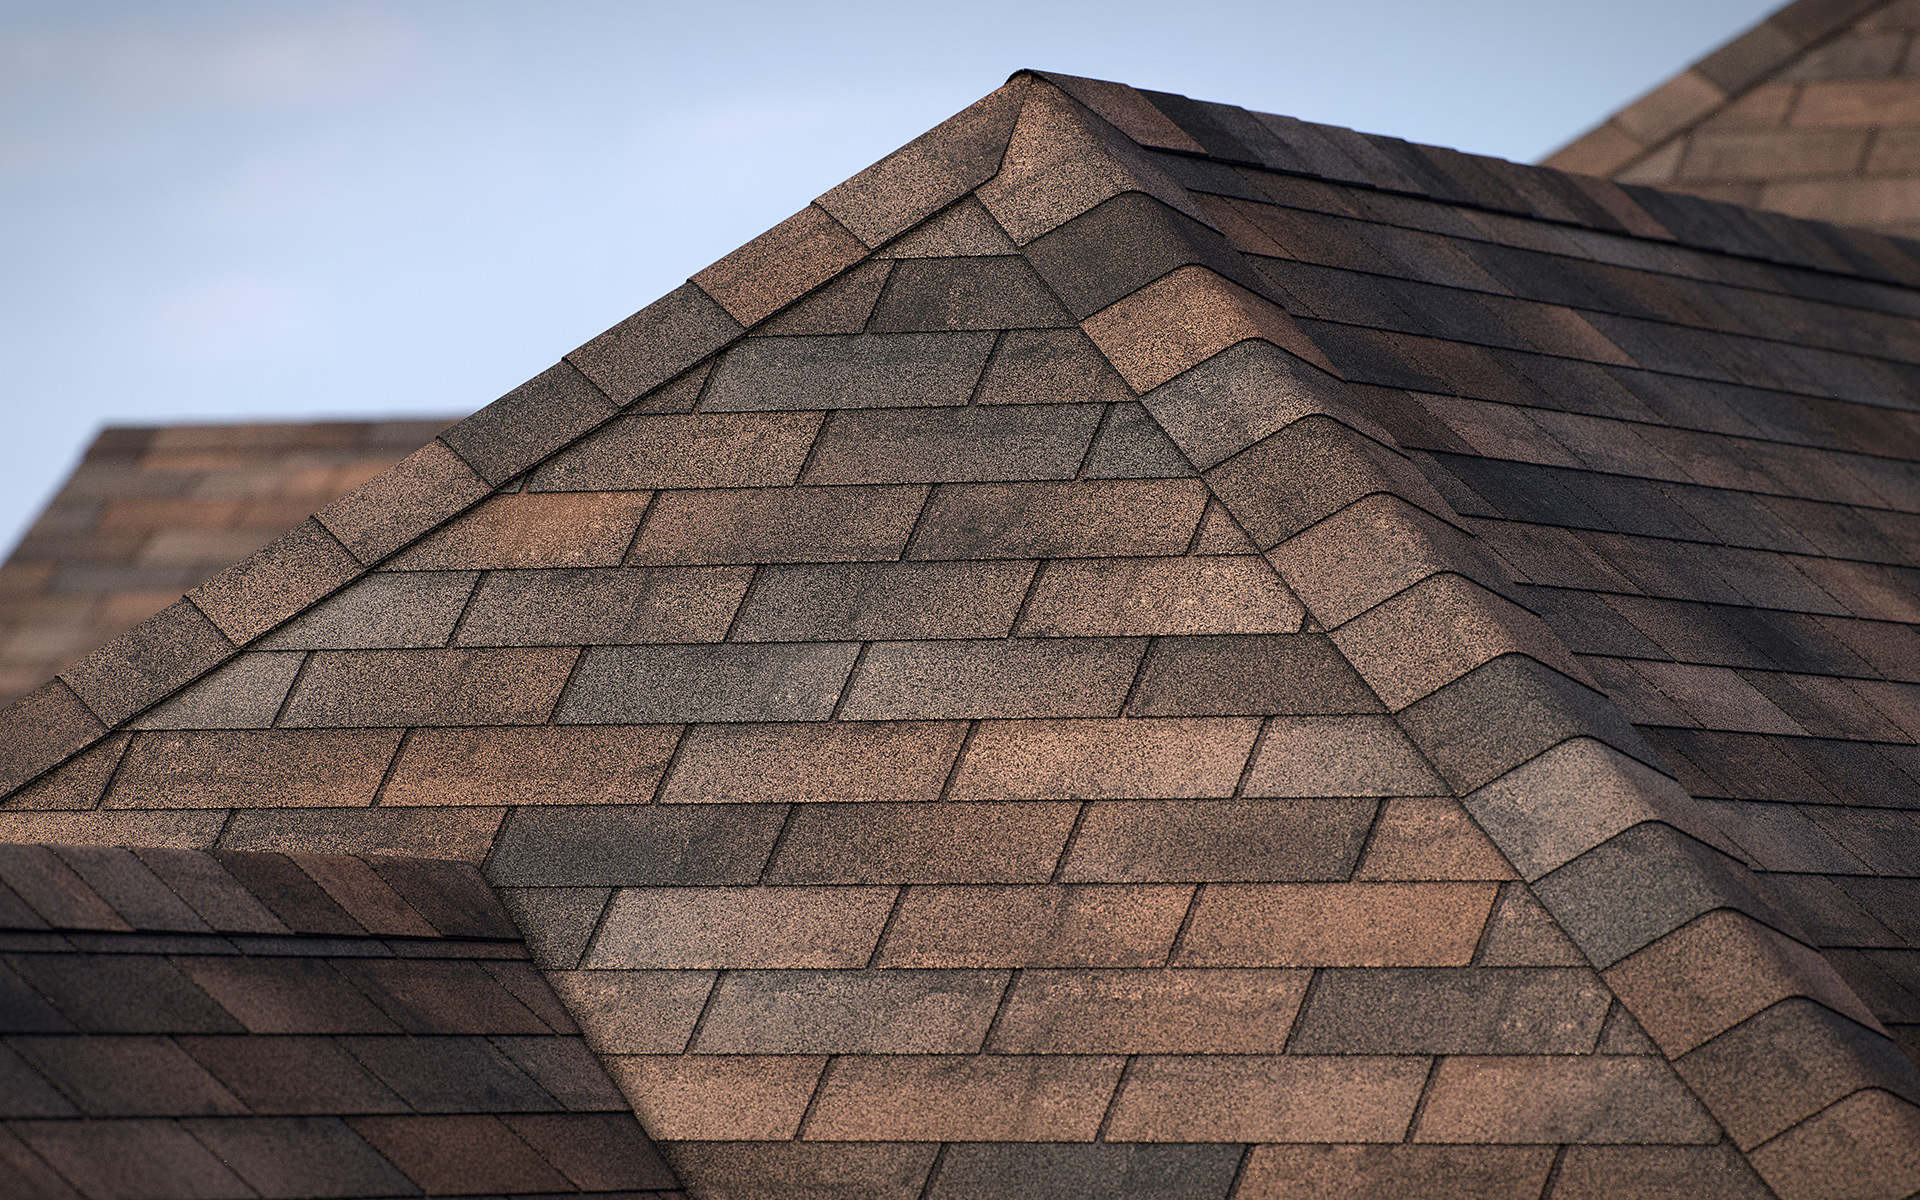 3-tab asphalt roof shingles oakwood color 3D model preset for 3dsmax and RailClone. Rendered with vray, made for arch-viz.